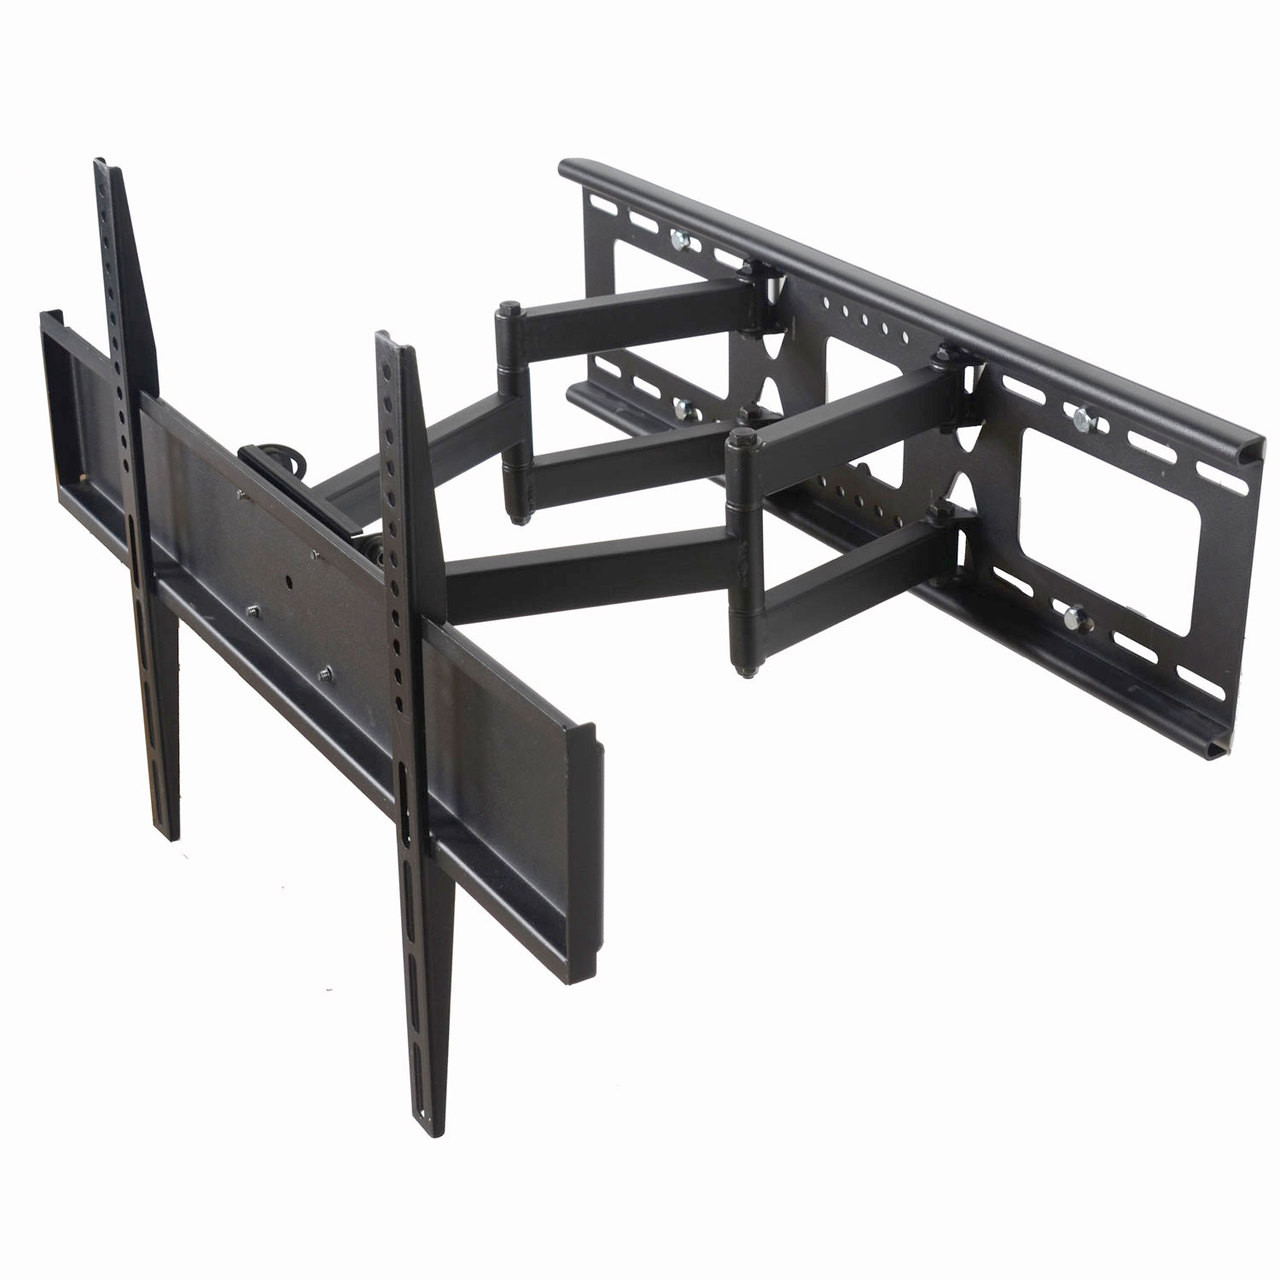 VideoSecu TV Wall Mount Monitor Bracket with Full Motion